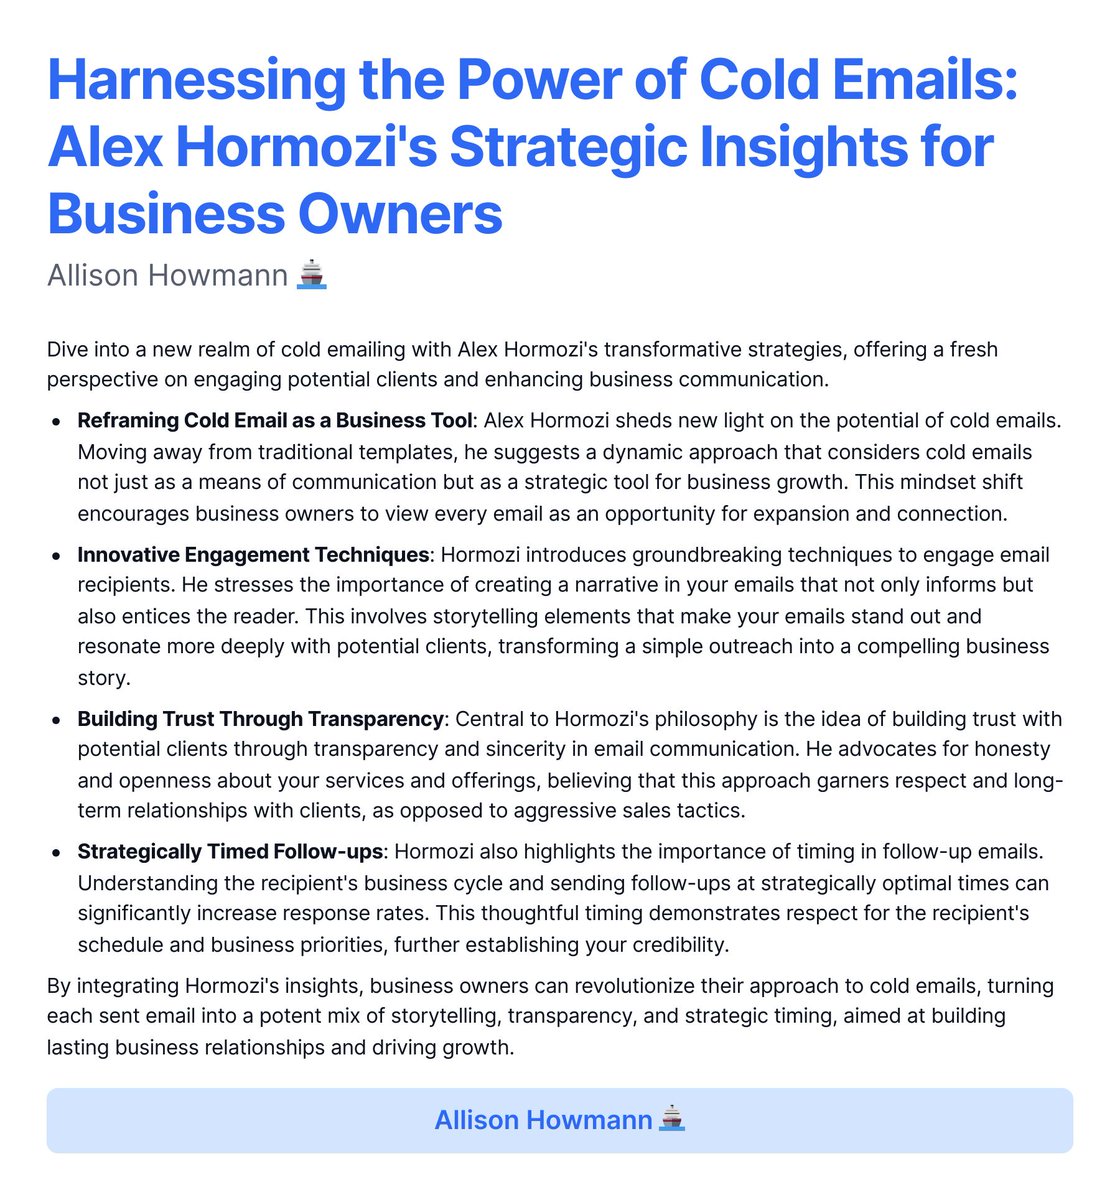 Harnessing the Power of Cold Emails: Alex Hormozi's Strategic Insights for Business Owners #ColdEmailInsights #BusinessStrategy #EmailStorytelling #HormoziTechniques #ClientEngagement #EmailTransparency #MarketingSuccess #SalesInnovation #ClientRelationships #EffectiveFollowUp